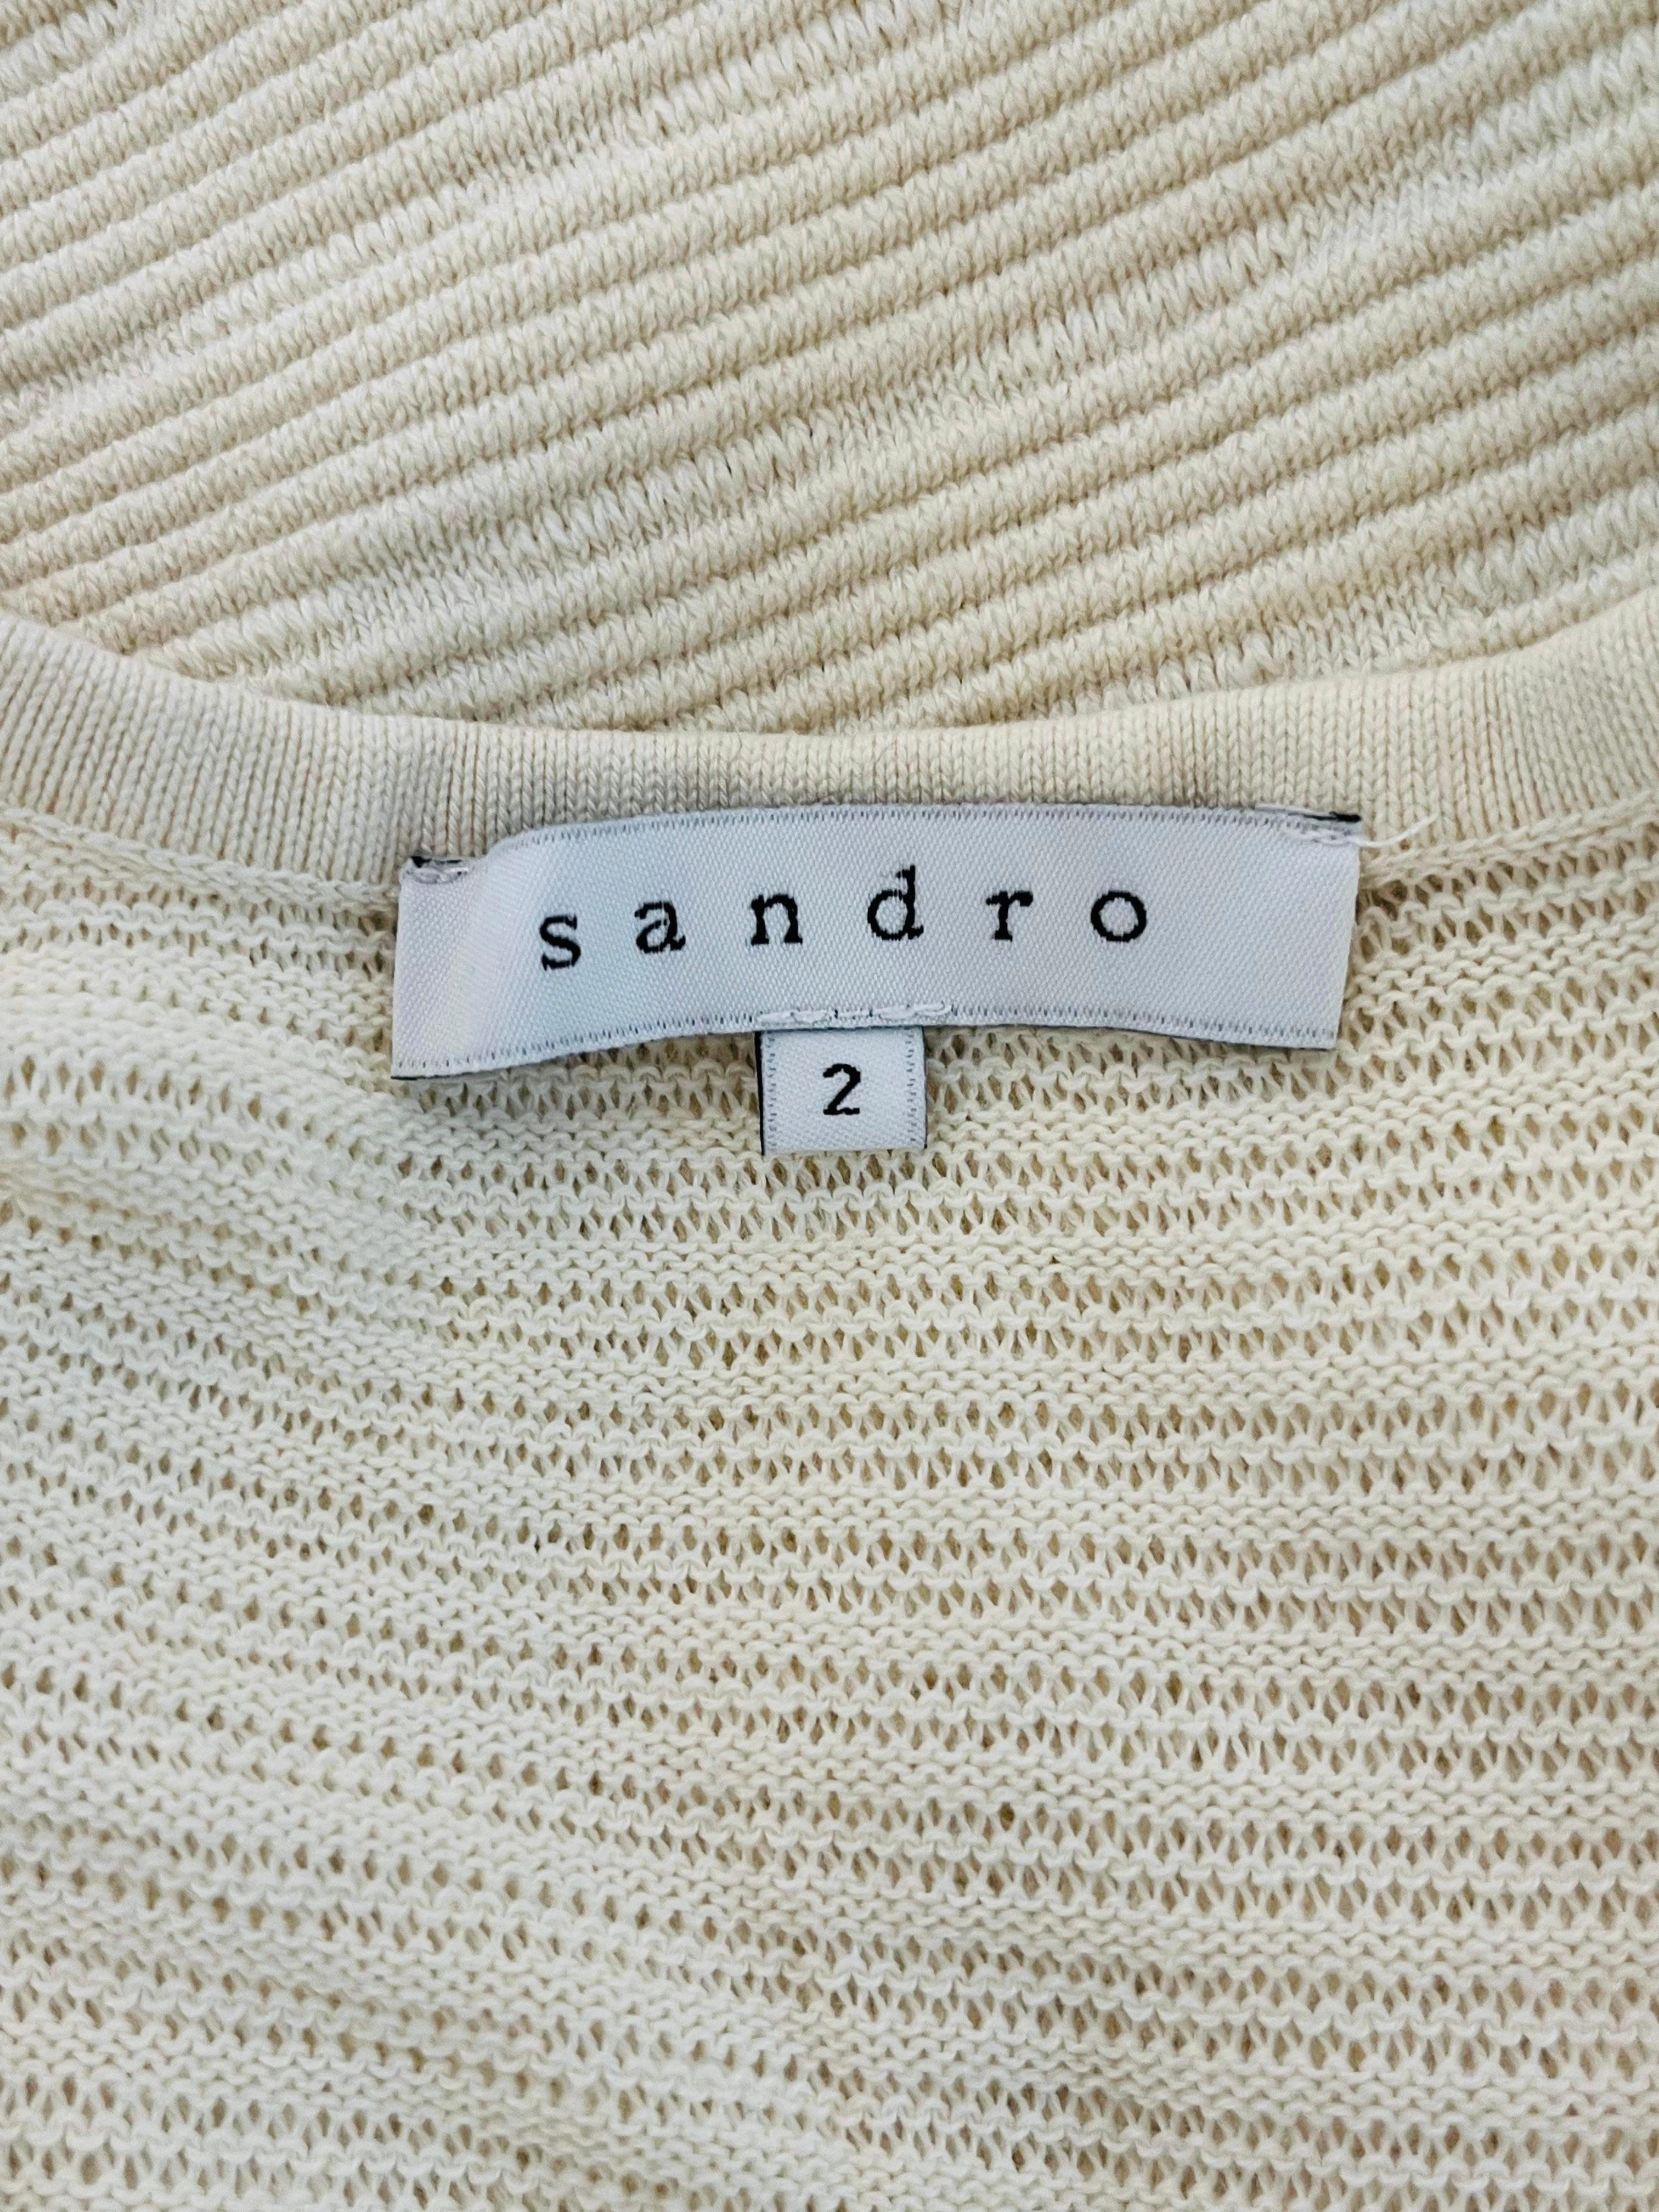 Sandro Fit & Flare Cotton Dress For Sale 1